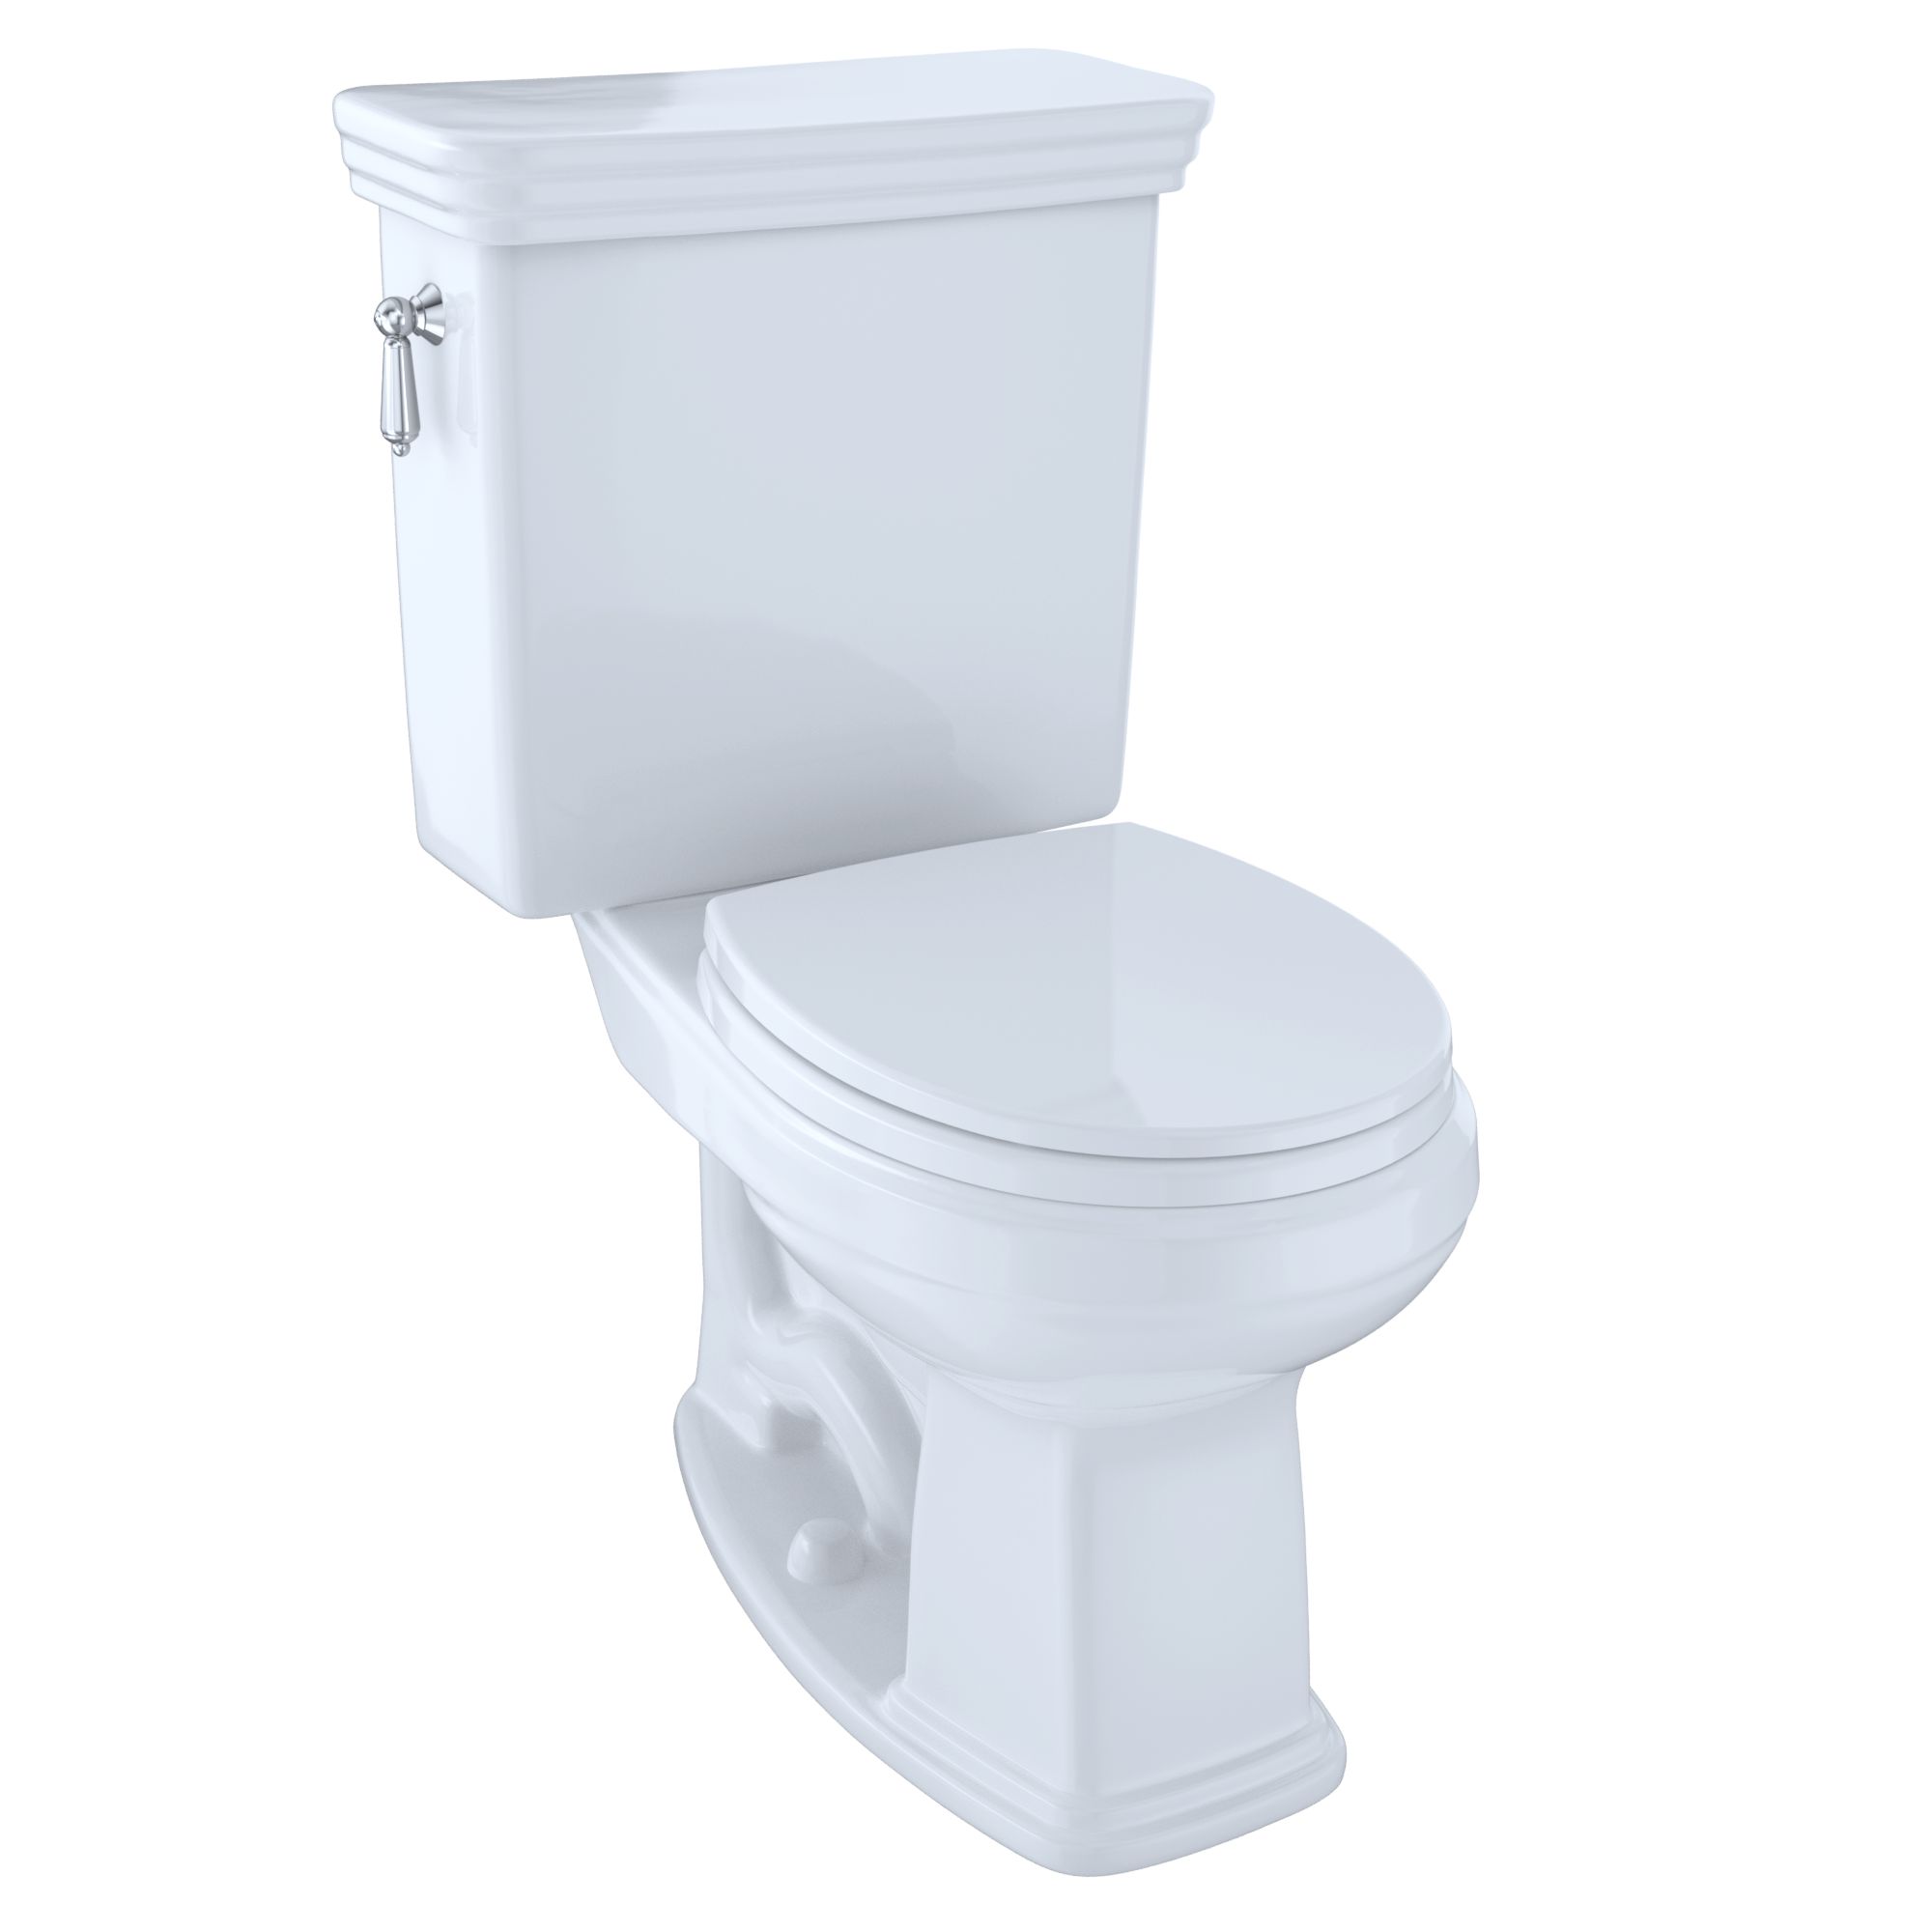 Fairford Sierra close coupled short projection toilet with